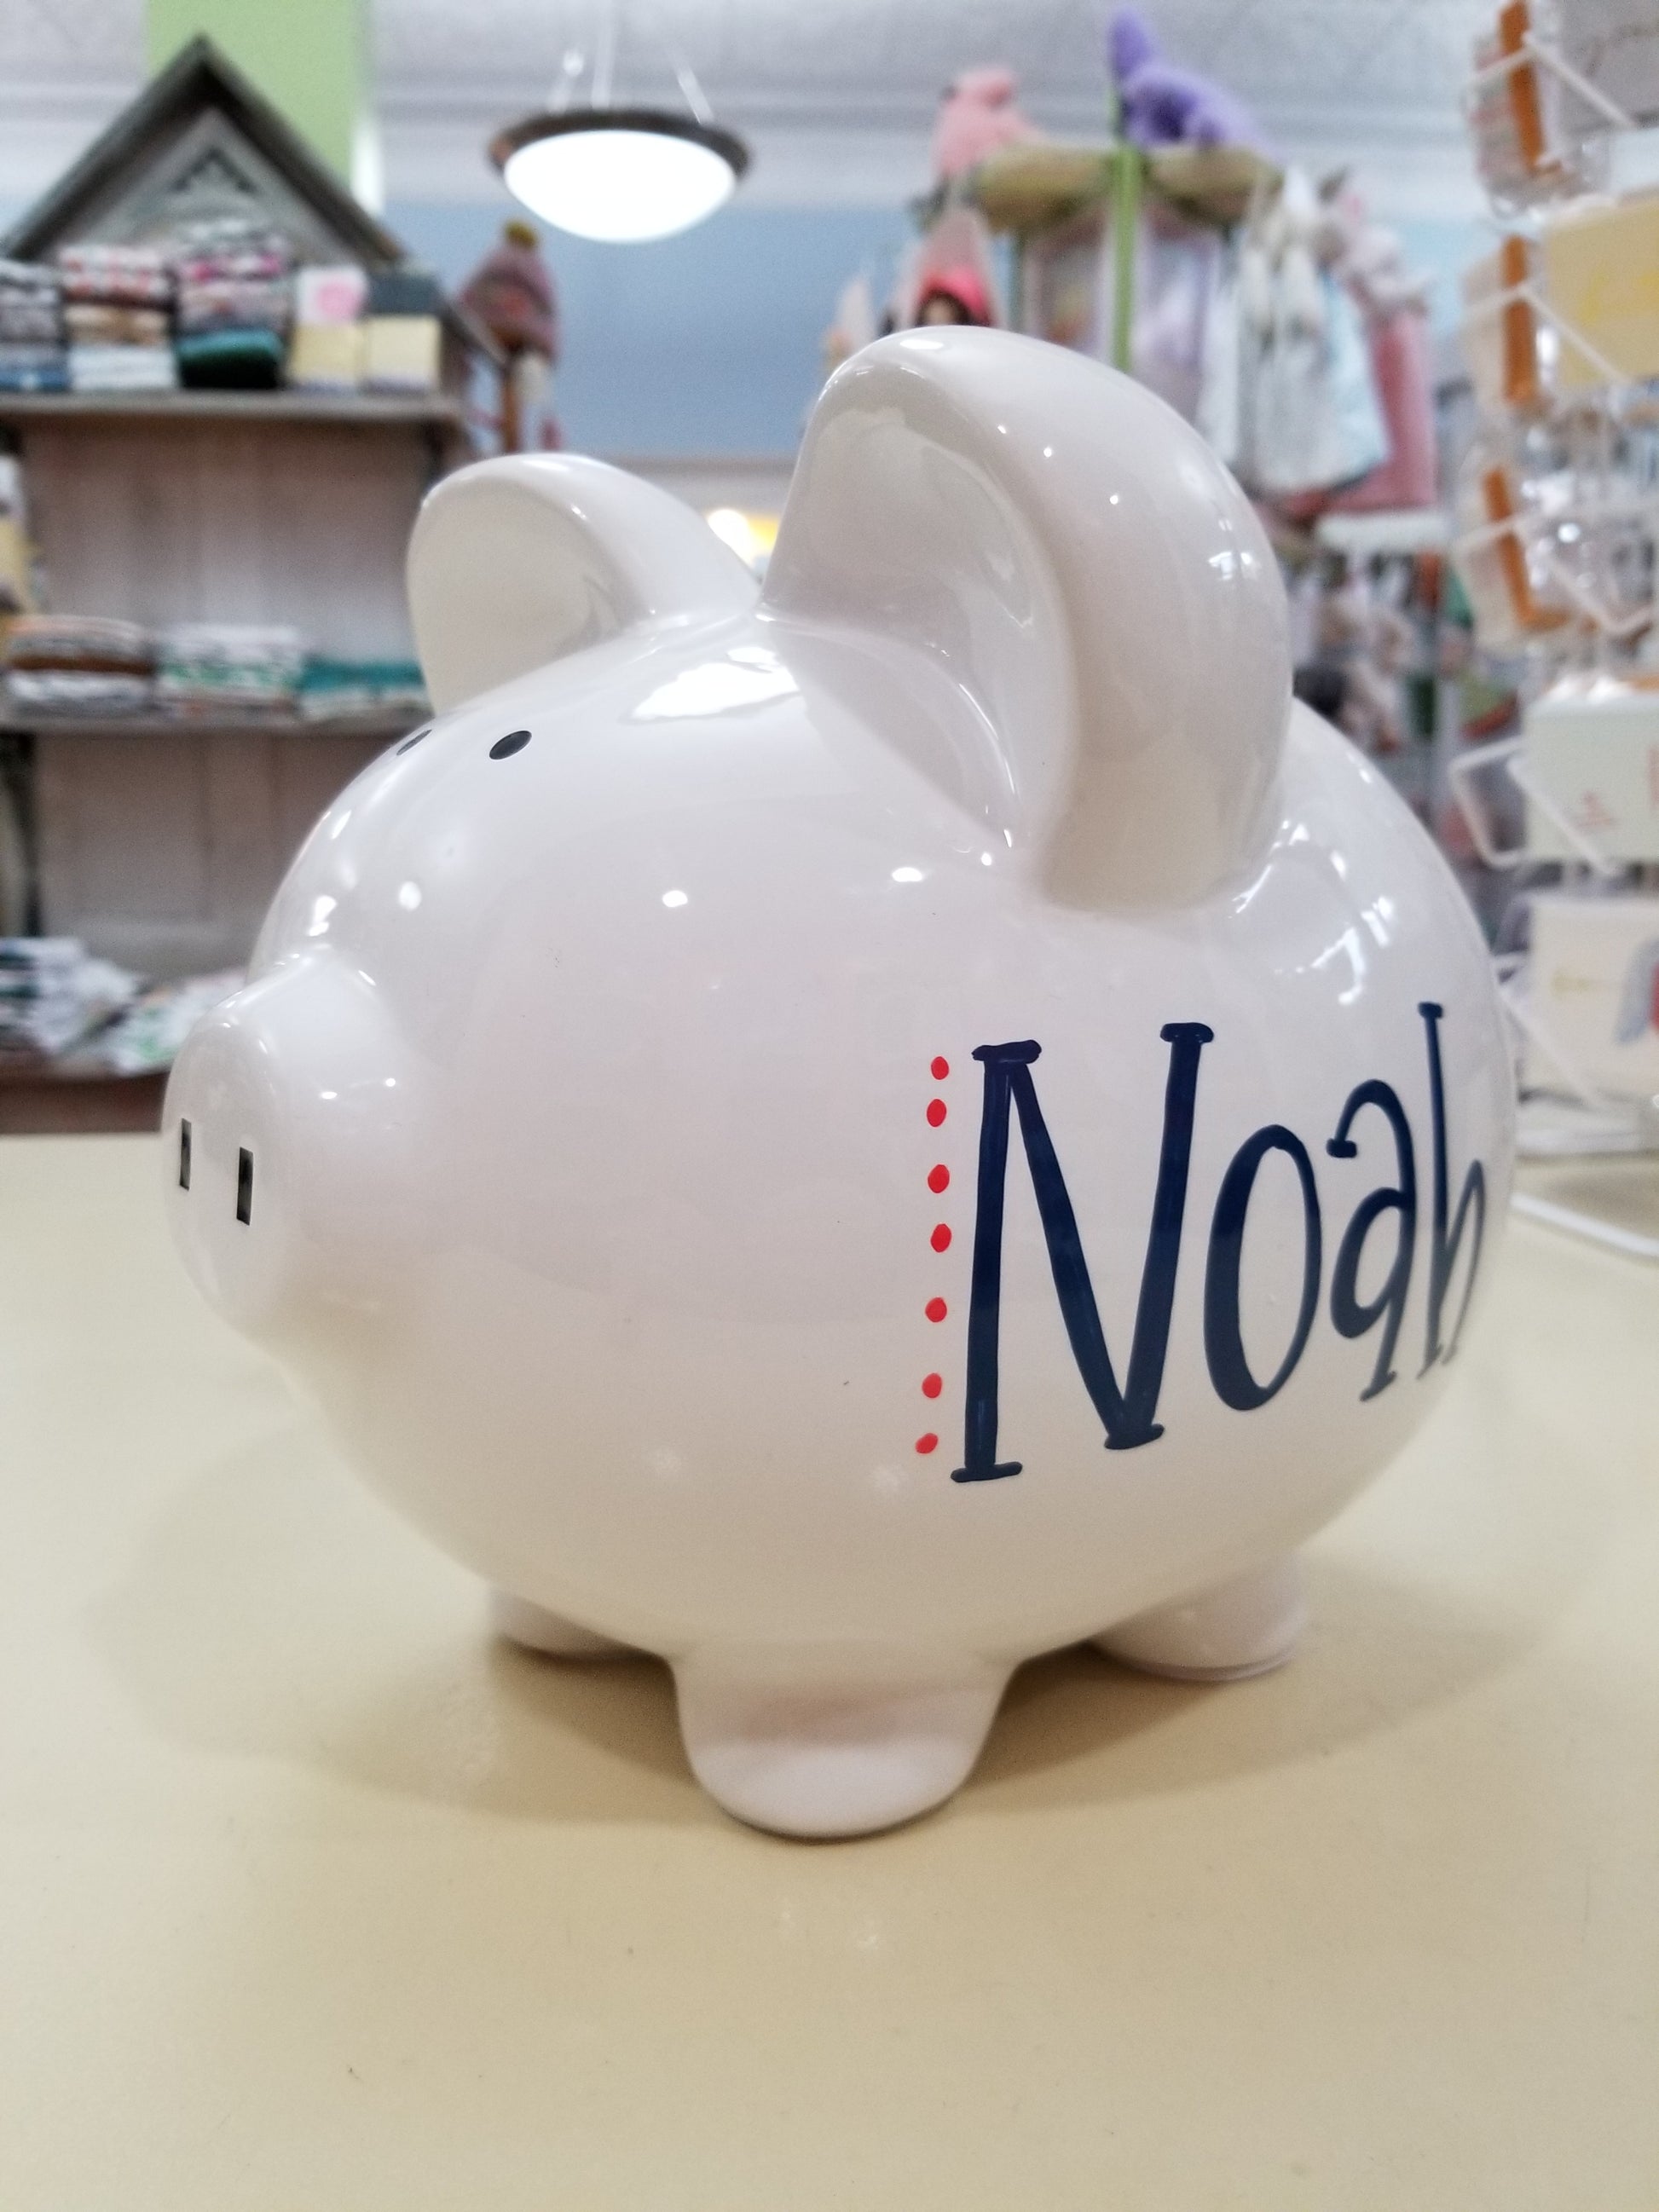 Where did piggy banks get their name from?